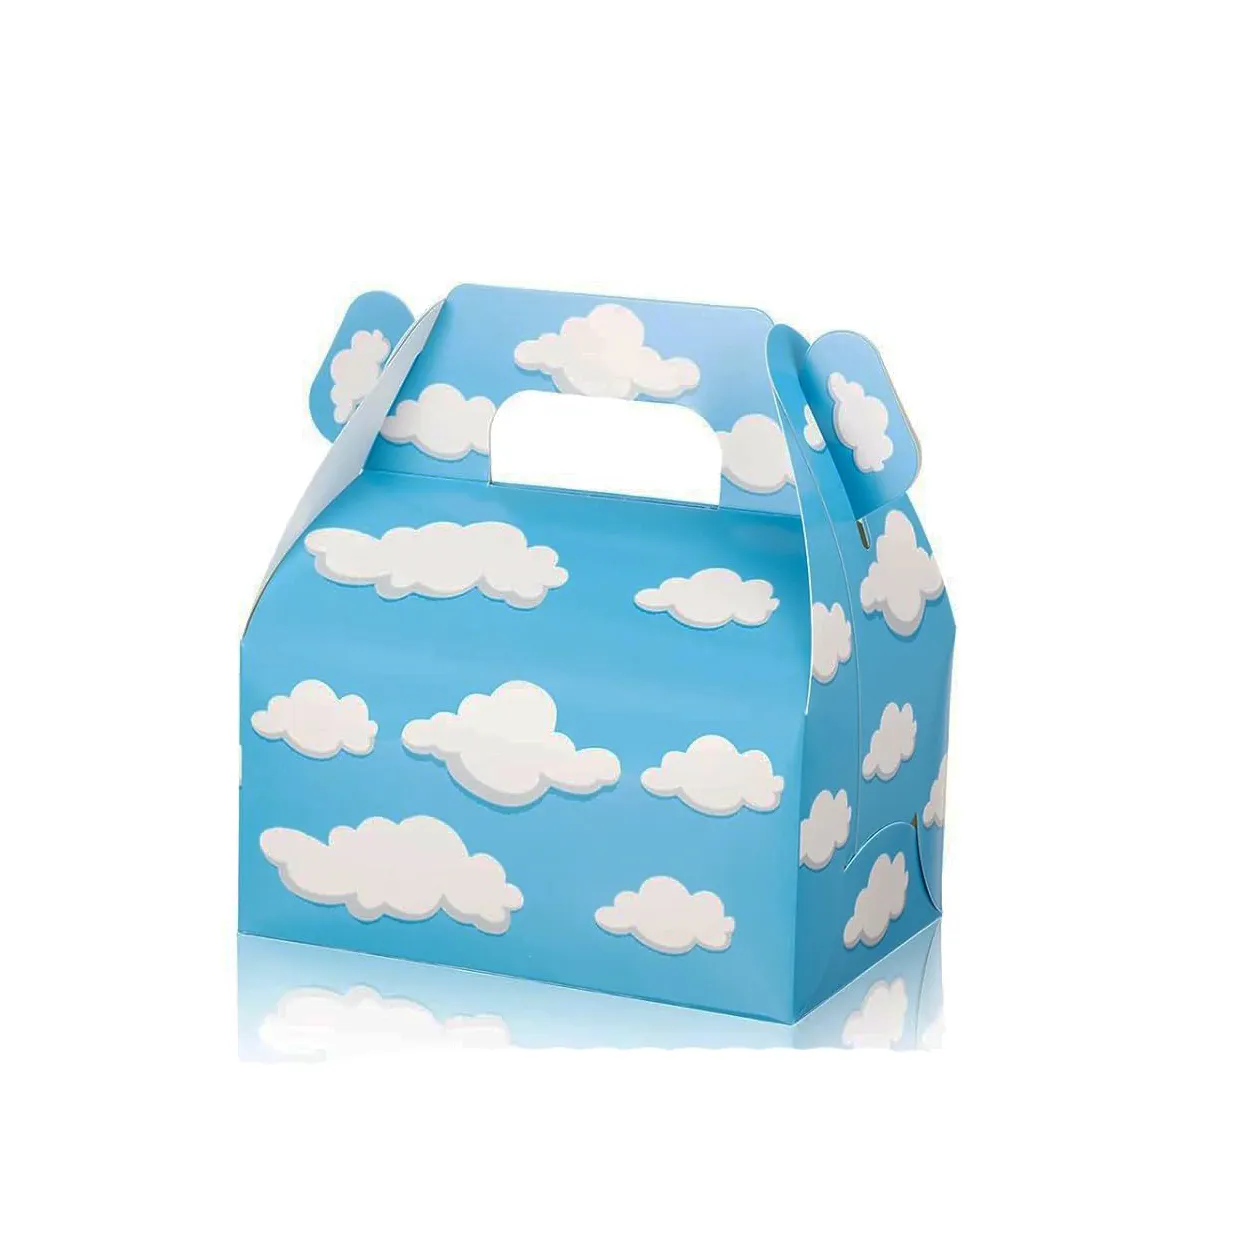 Wholesale kids birthday party supplies cardboard wrapping candy Blue white cloud Pattern design Portable for kids gift box set